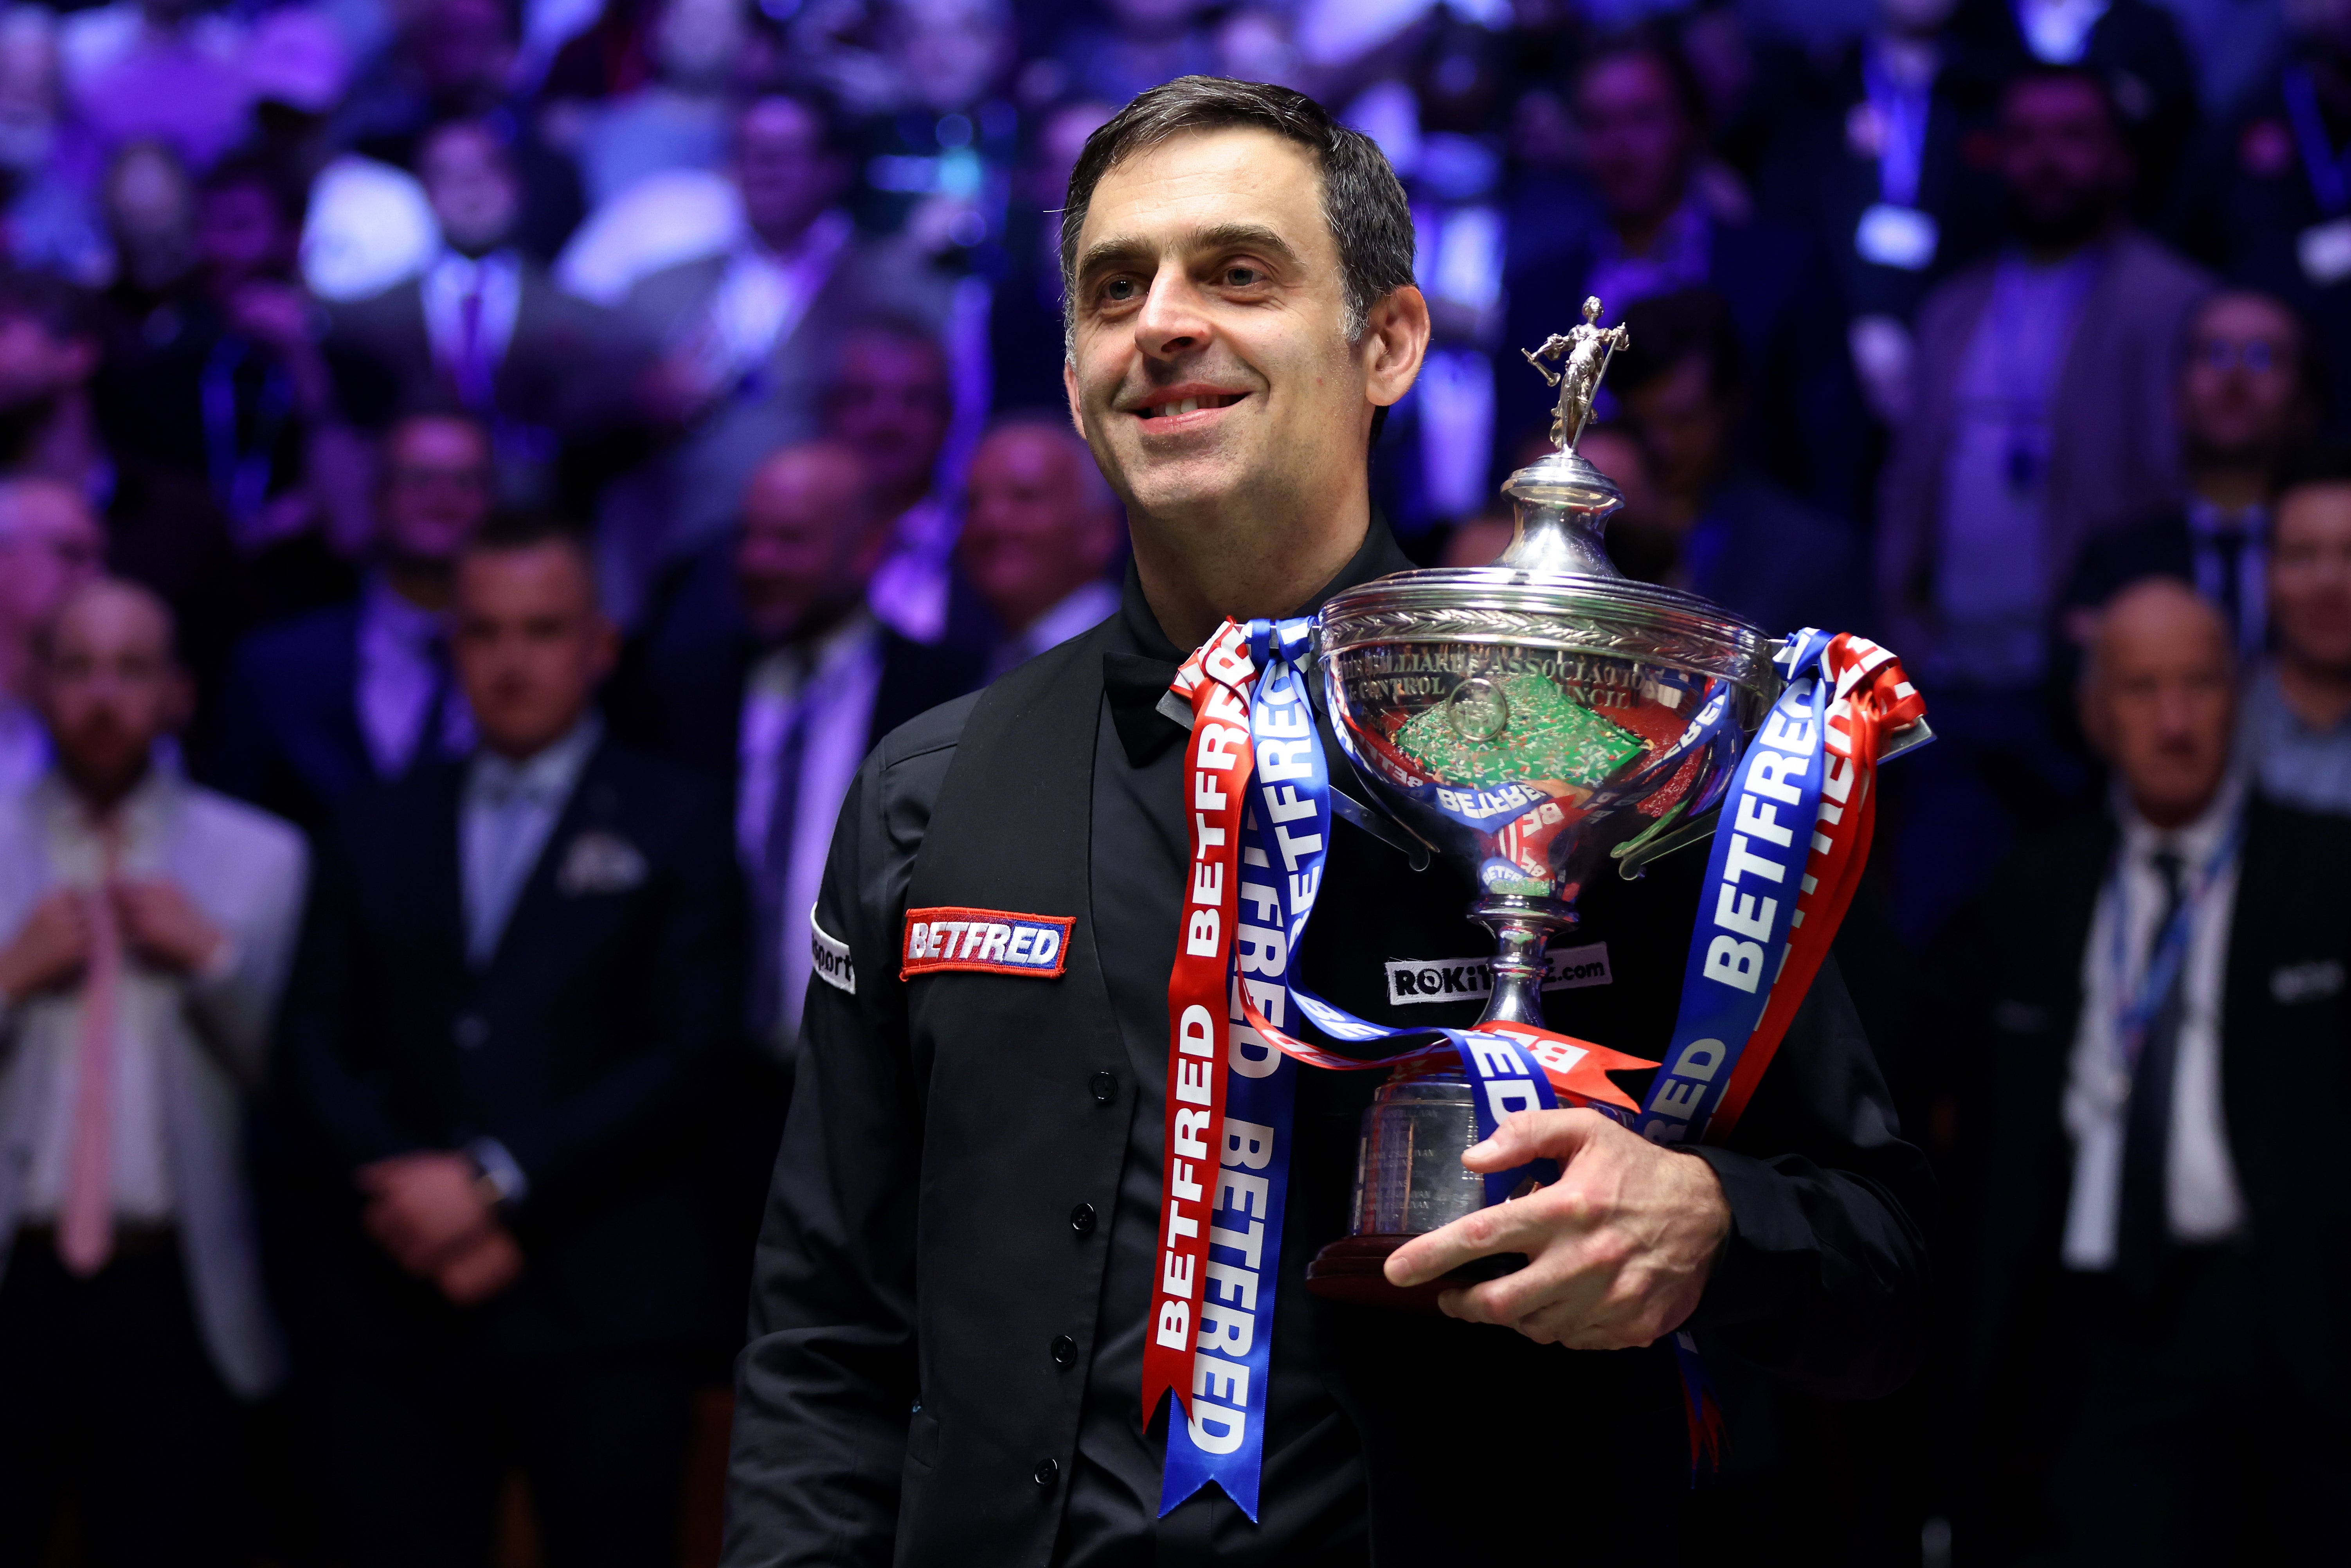 Ronnie O’Sullivan secured his seventh world title with an 18-13 victory over Judd Trump